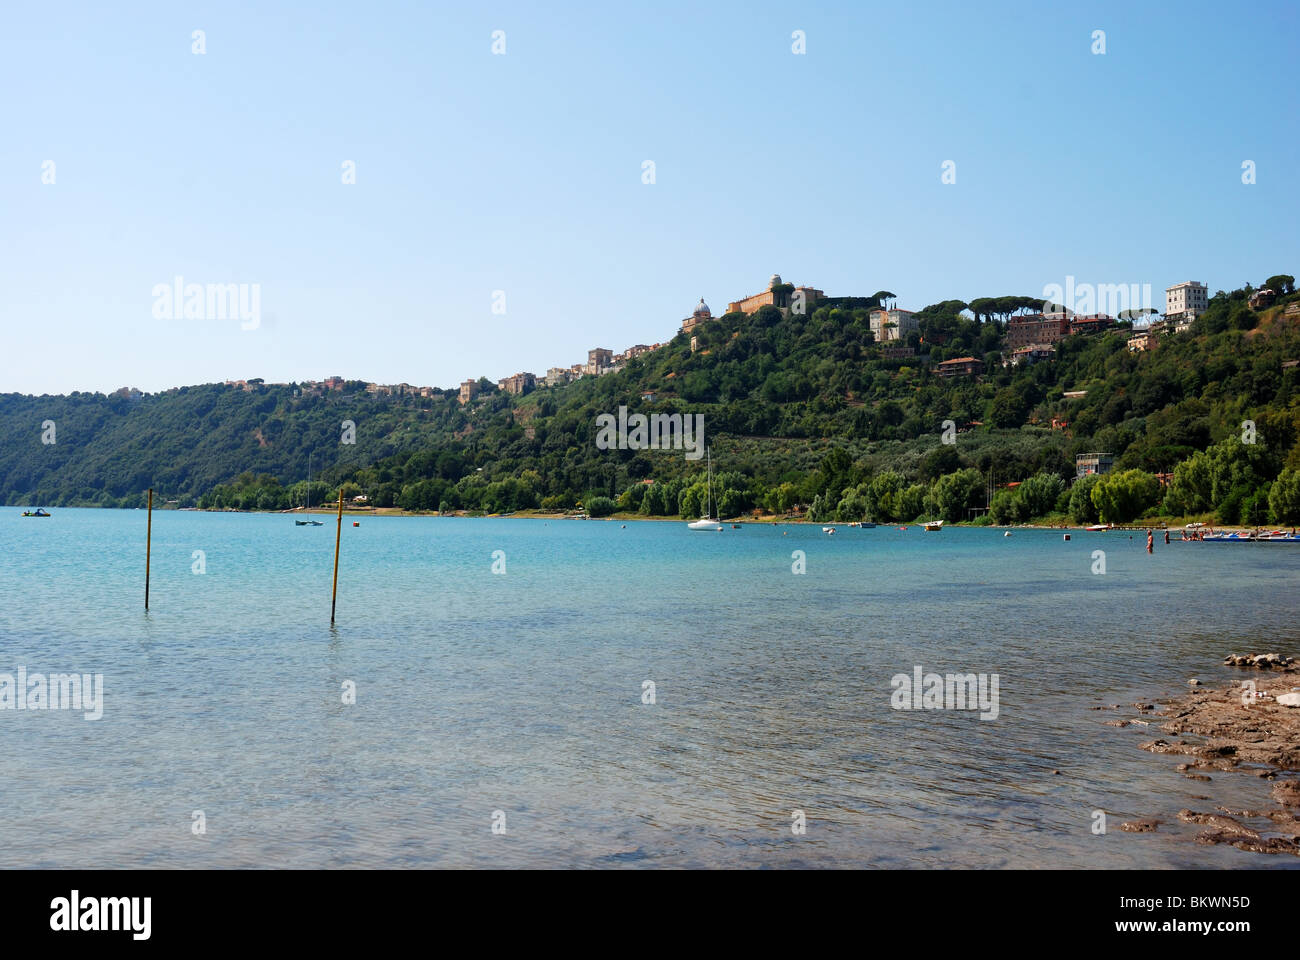 Alban lake in a sunny day Stock Photo